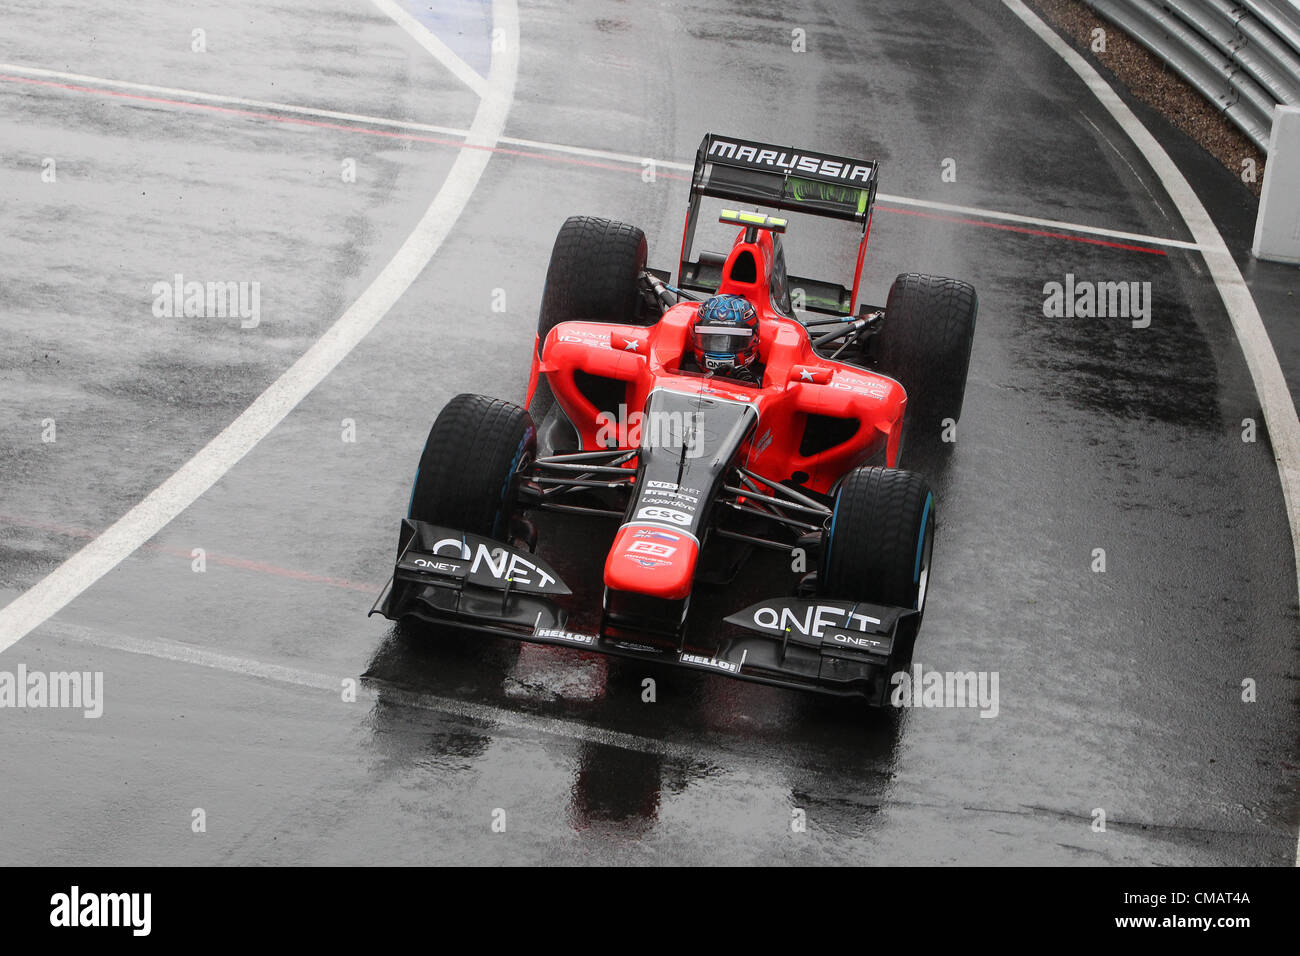 06.07.2012 Towcester, England.  formula 1 GP, Great Britain in Silverstone 06.07.2012, Charles Pic, Marussia F1 Team Stock Photo